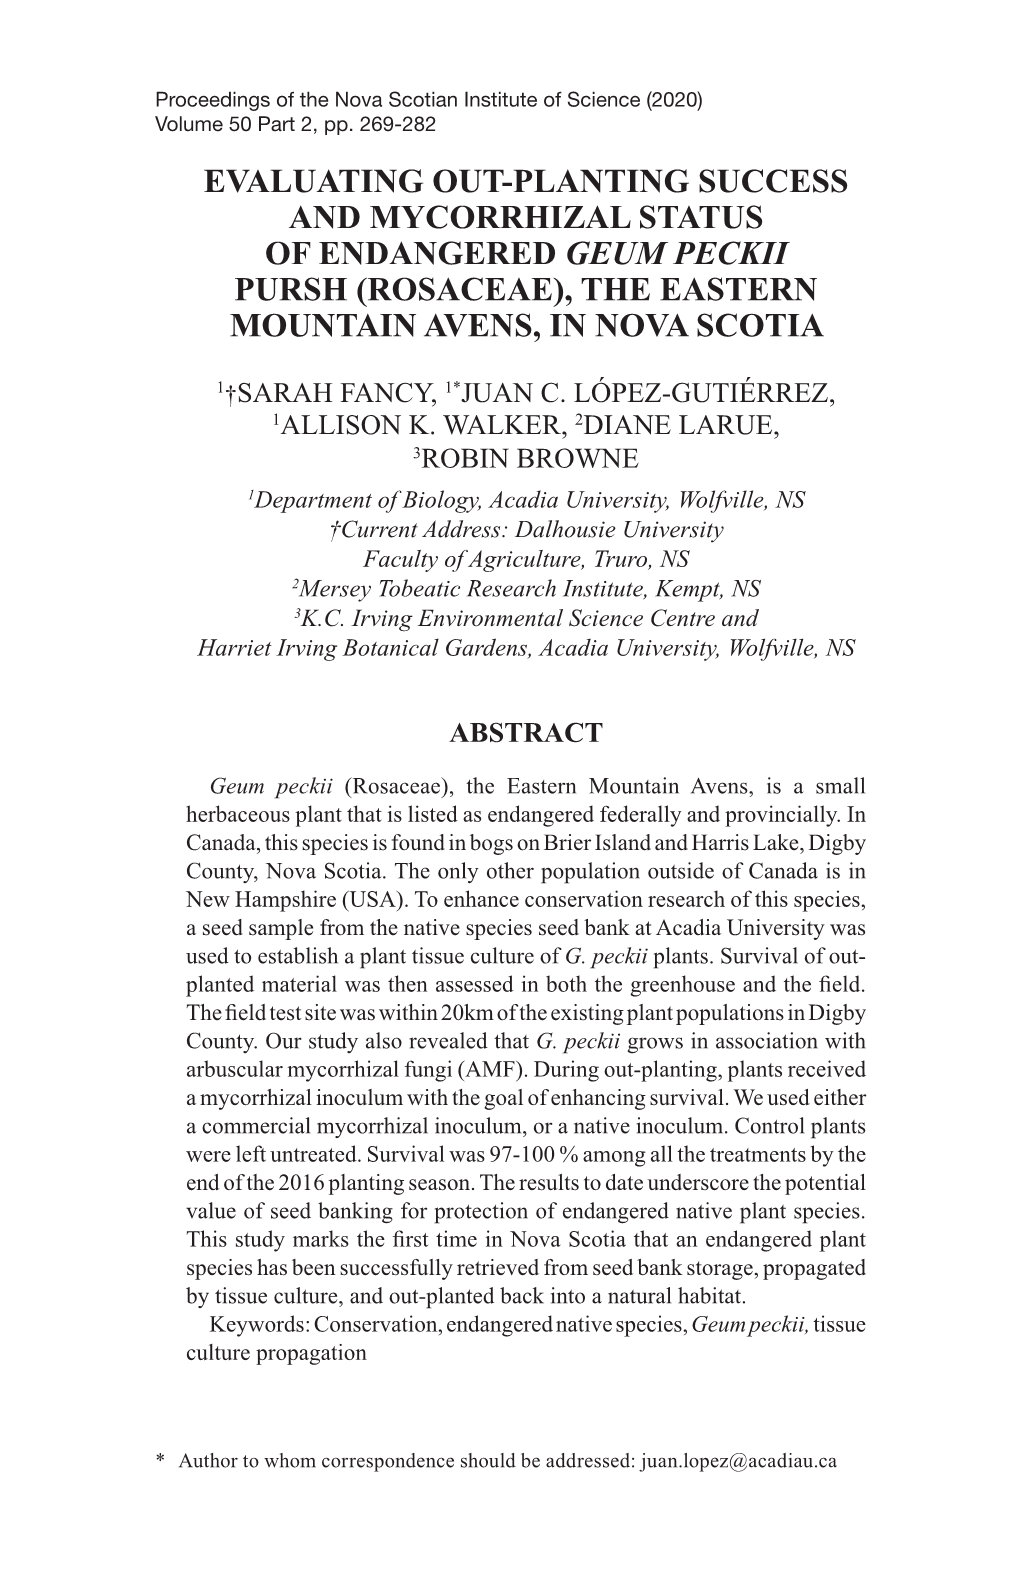 Evaluating Out-Planting Success and Mycorrhizal Status of Endangered Geum Peckii Pursh (Rosaceae), the Eastern Mountain Avens, in Nova Scotia